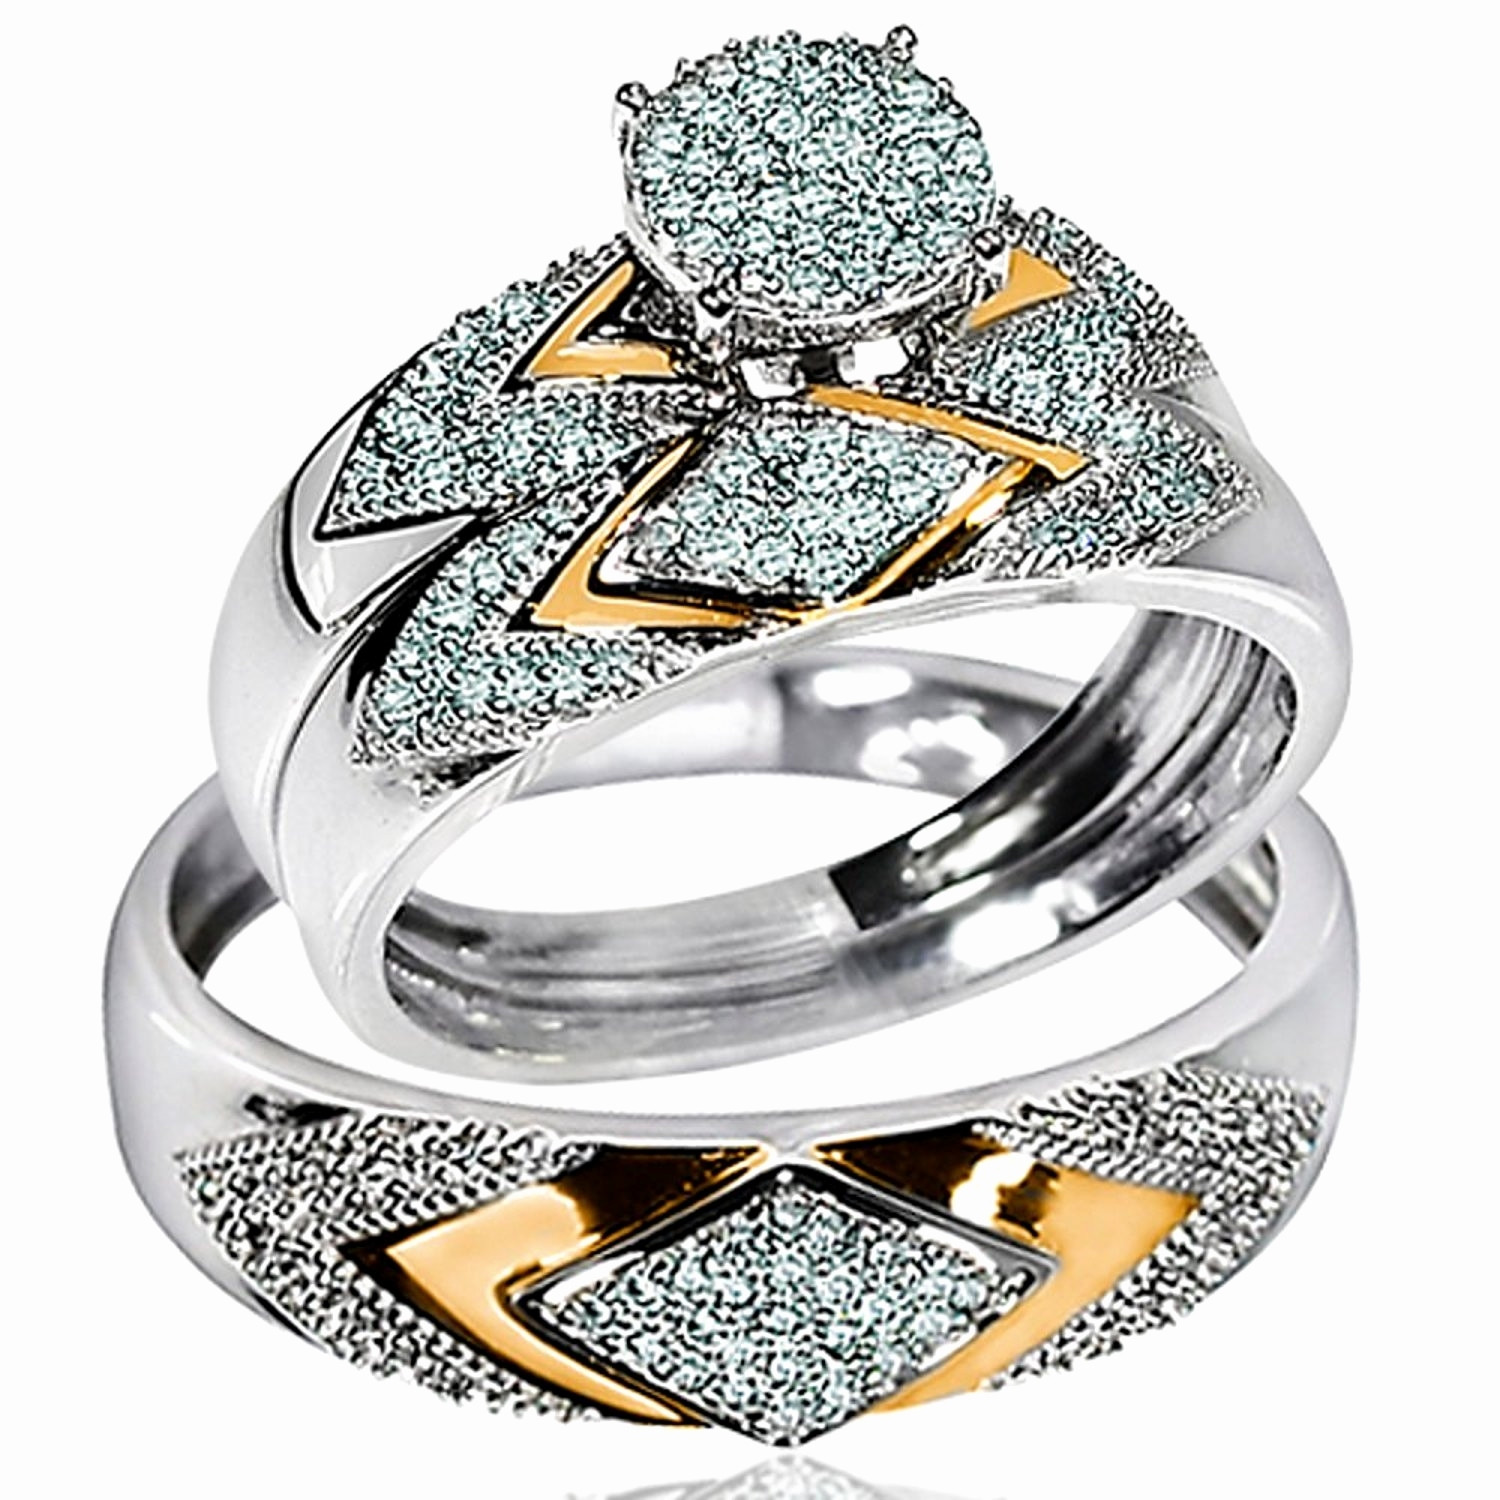 Cheap Wedding Ring Sets His And Hers
 Awesome cheap his and hers wedding sets Matvuk